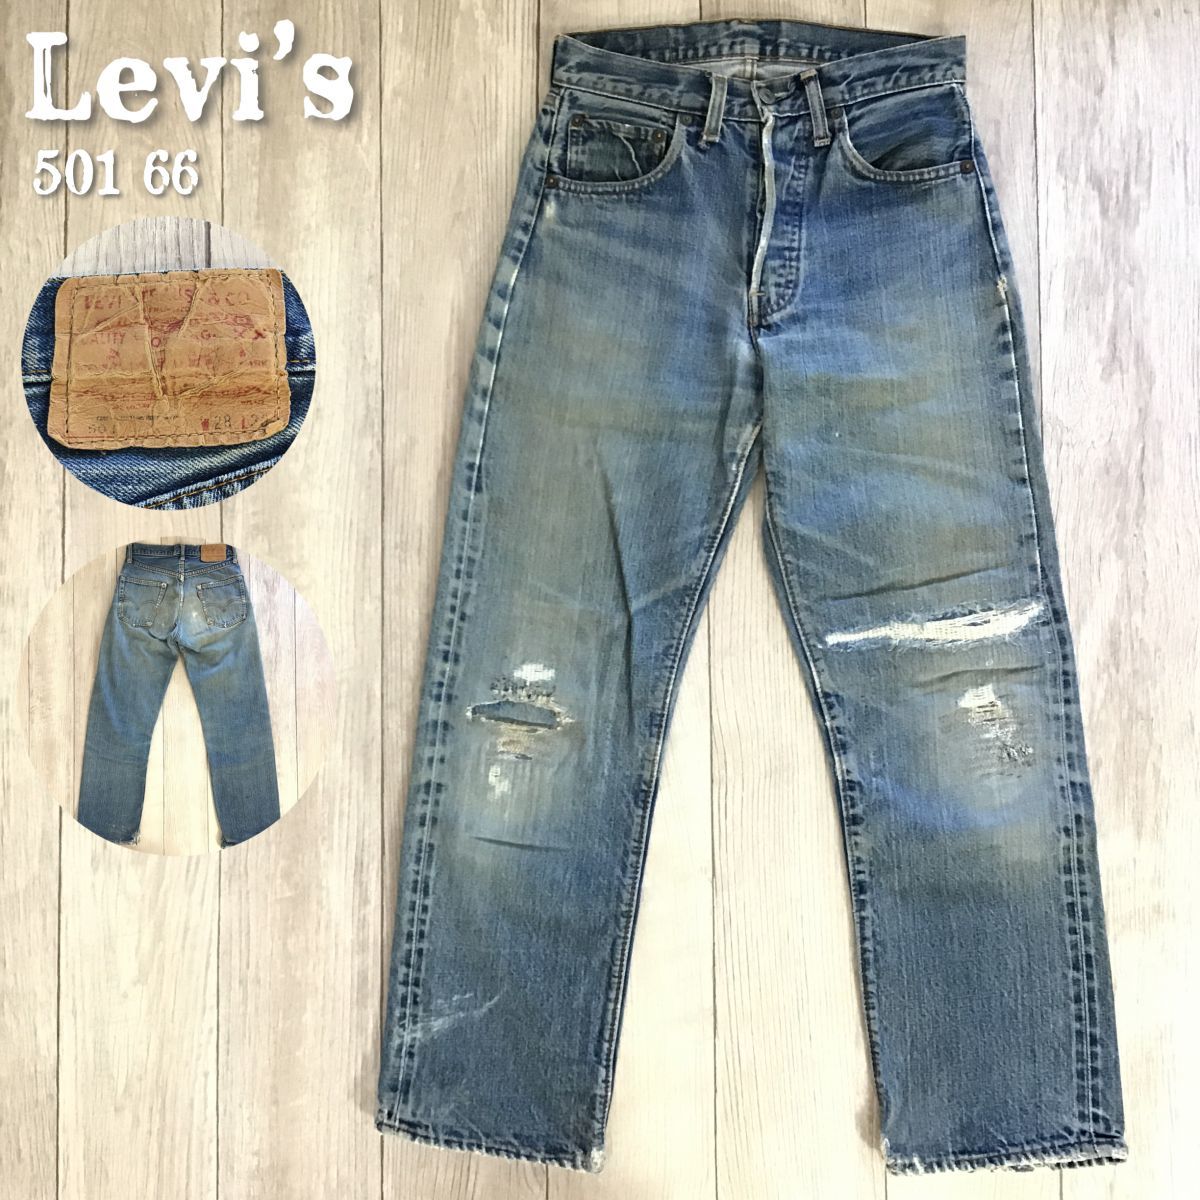 ◎SPECIAL!!◎[LEVIS リーバイス]501 66 前期 刻印6 [W28 L30]70's